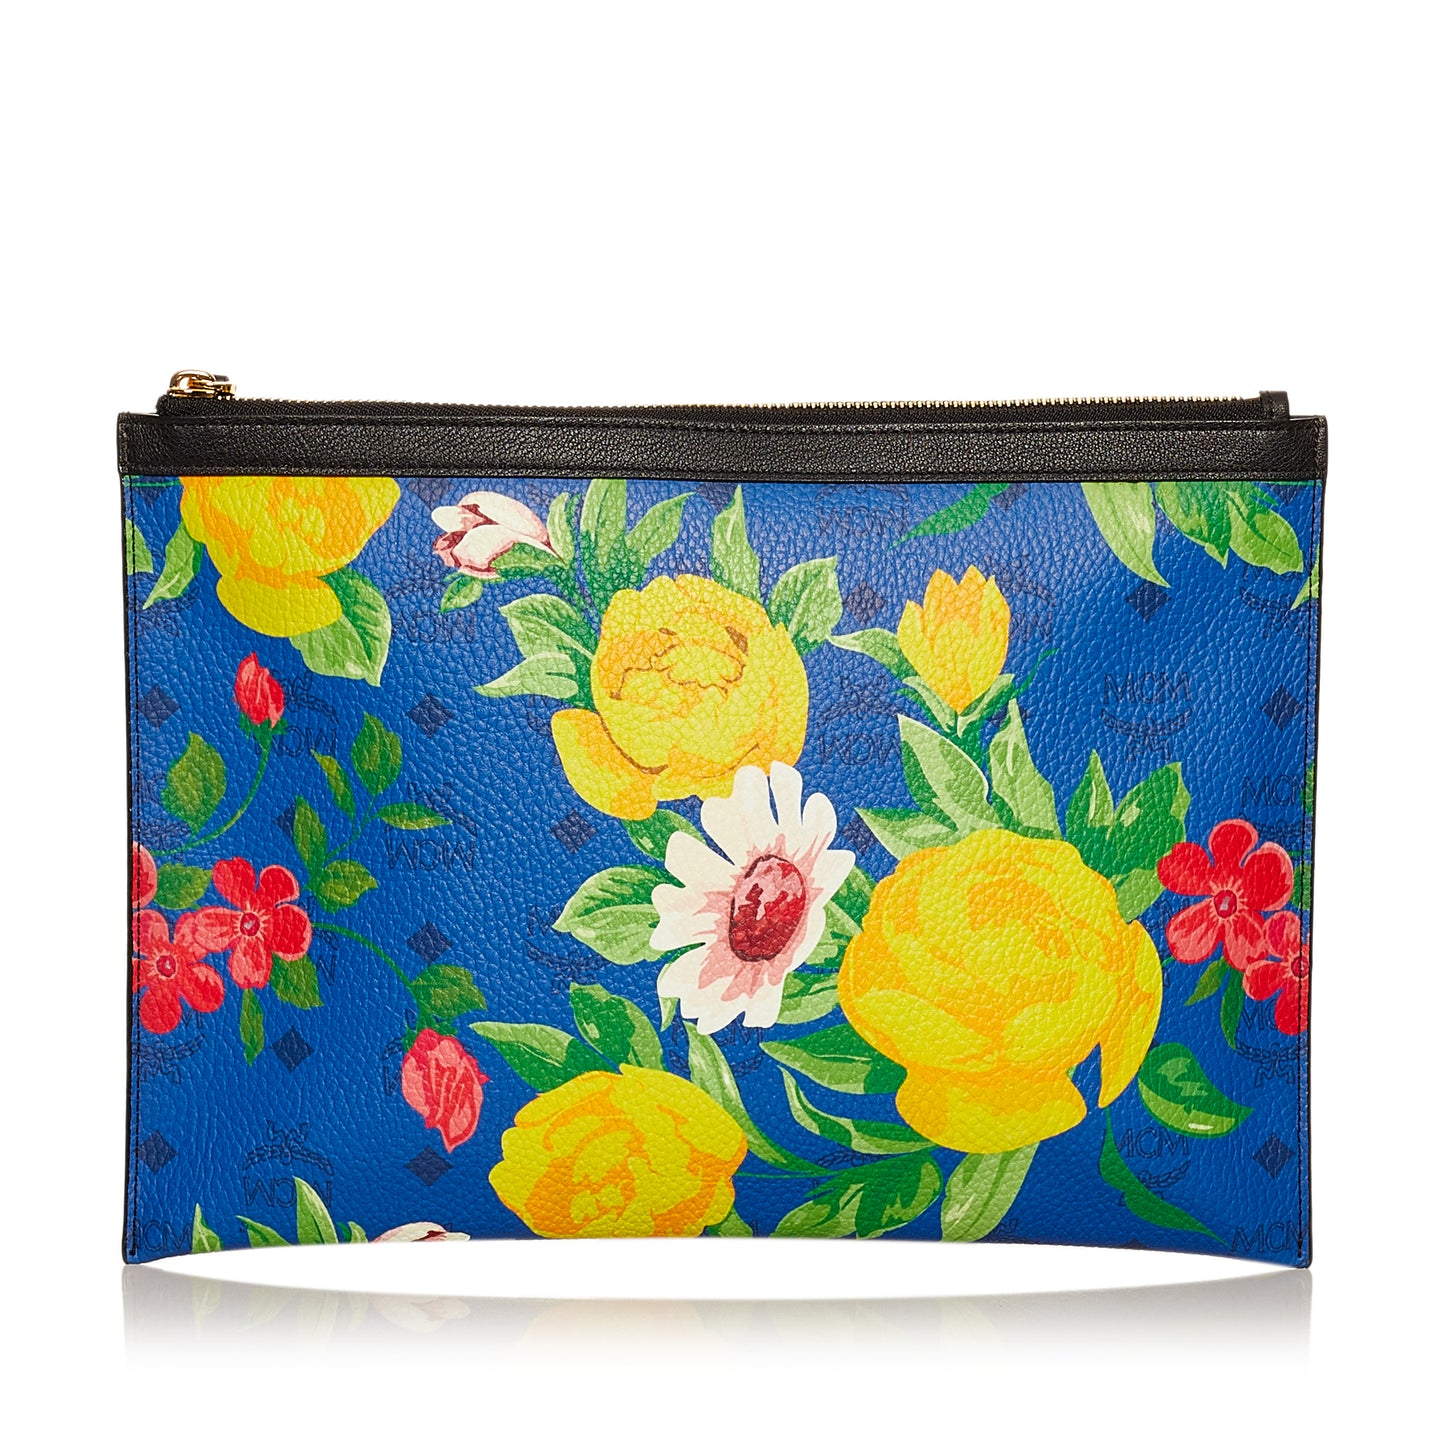 Paradiso Leather Clutch Bag